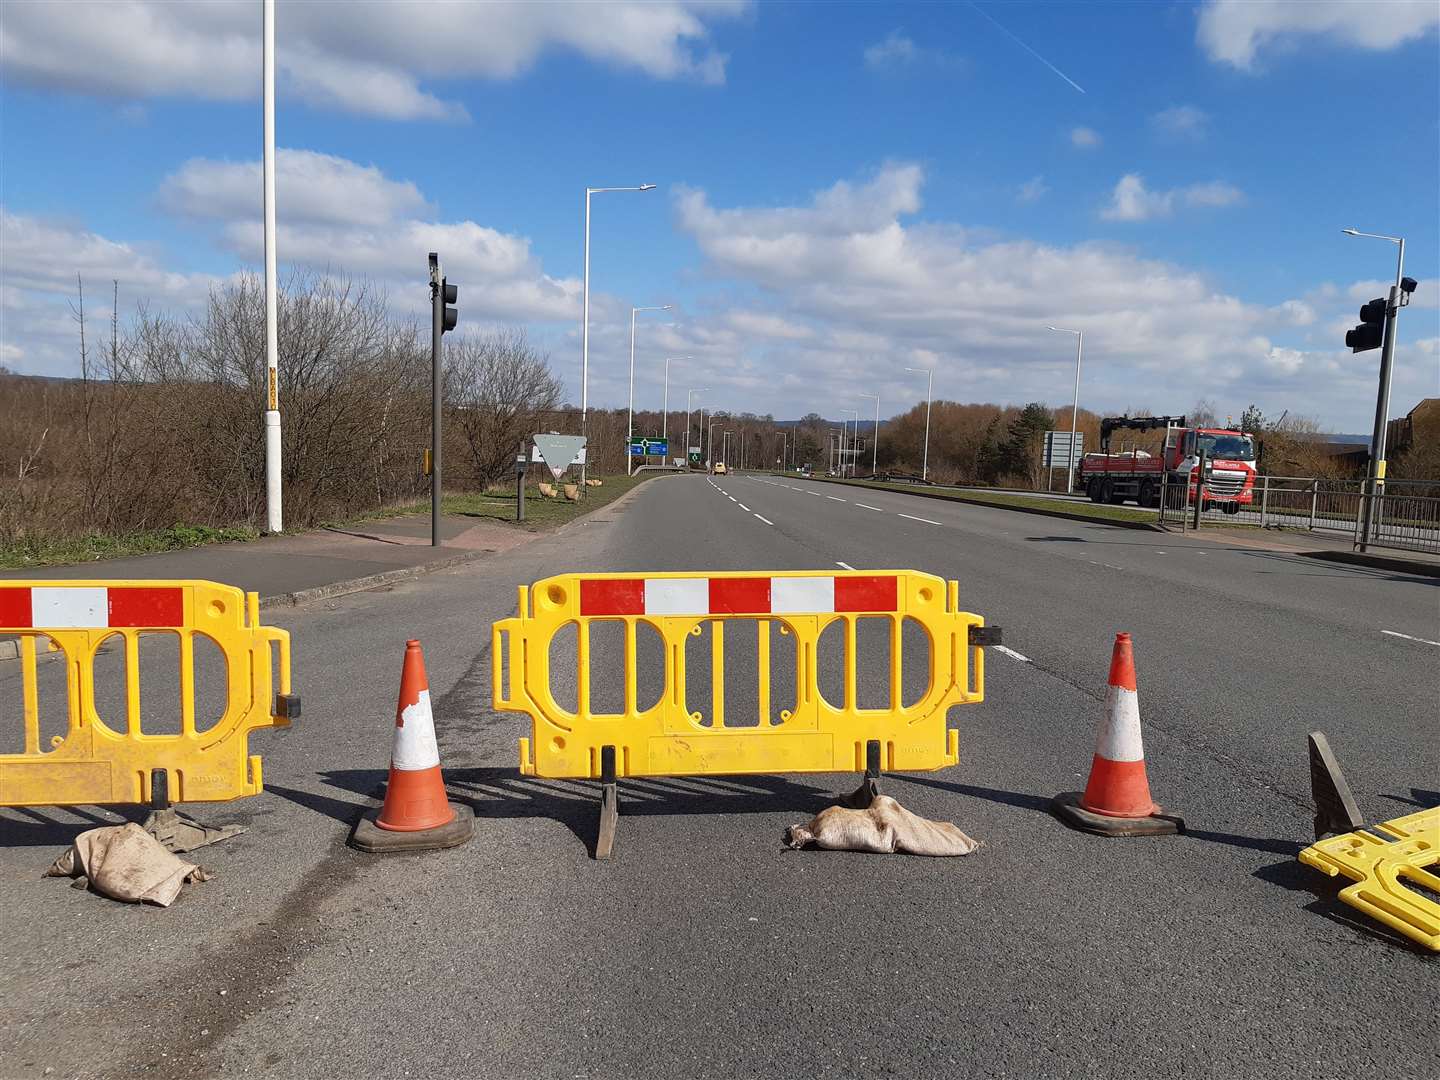 The road between Drovers Roundabout and Junction 9 was closed throughout the morning following the crash